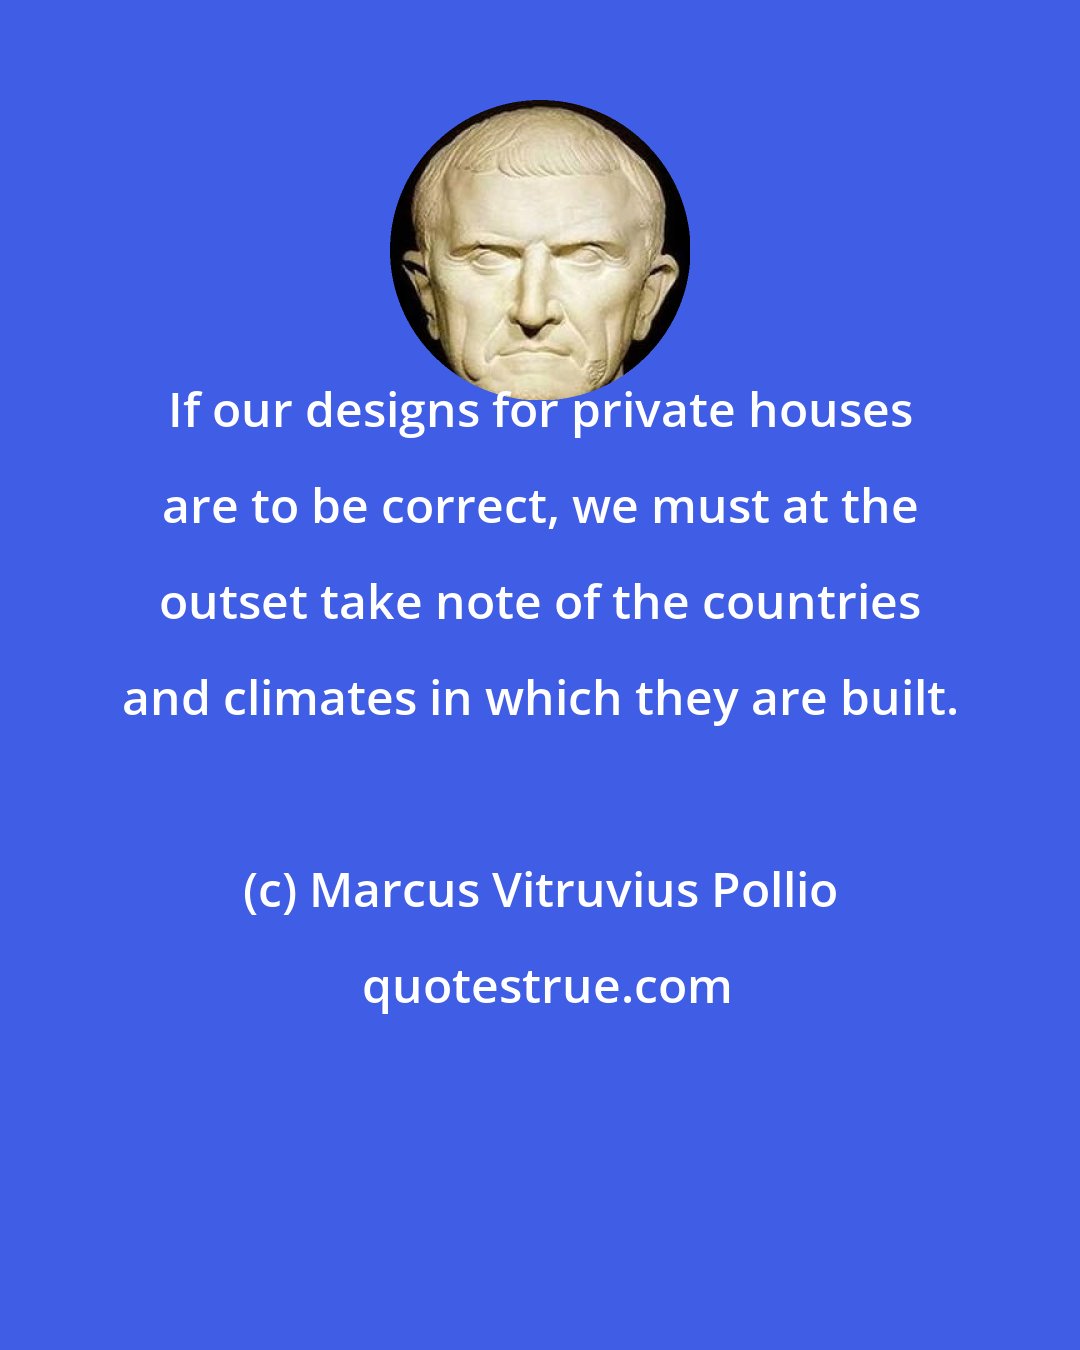 Marcus Vitruvius Pollio: If our designs for private houses are to be correct, we must at the outset take note of the countries and climates in which they are built.